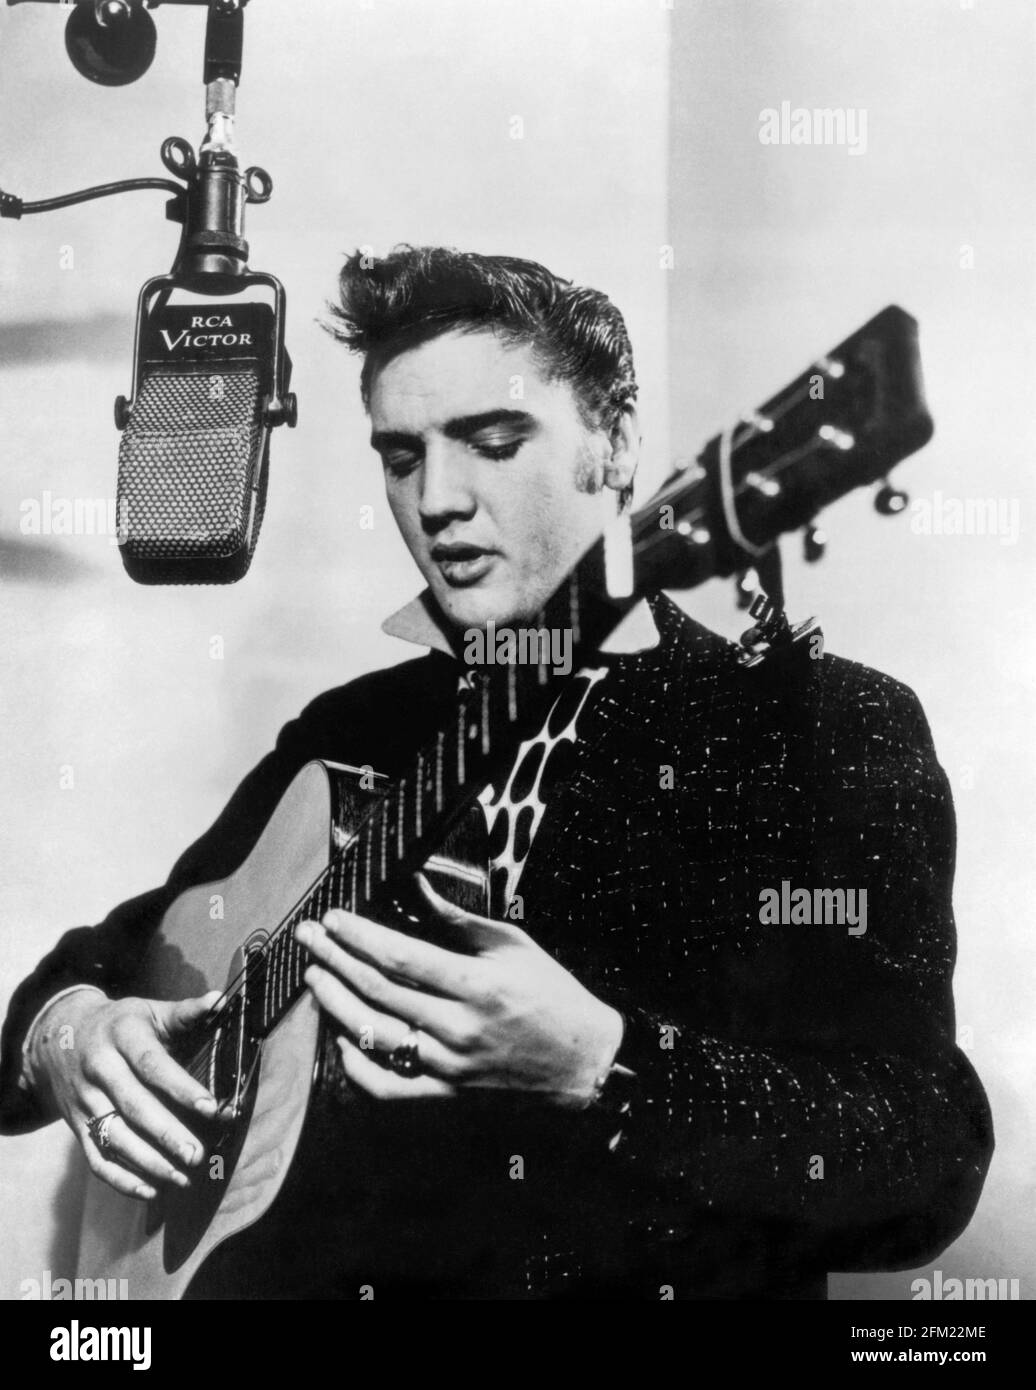 Elvis Presley at RCA Victor Studio A (aka Studio 1) in New York City on December 1, 1955 with a borrowed guitar and a vintage RCA 44A microphone. (USA) Stock Photo